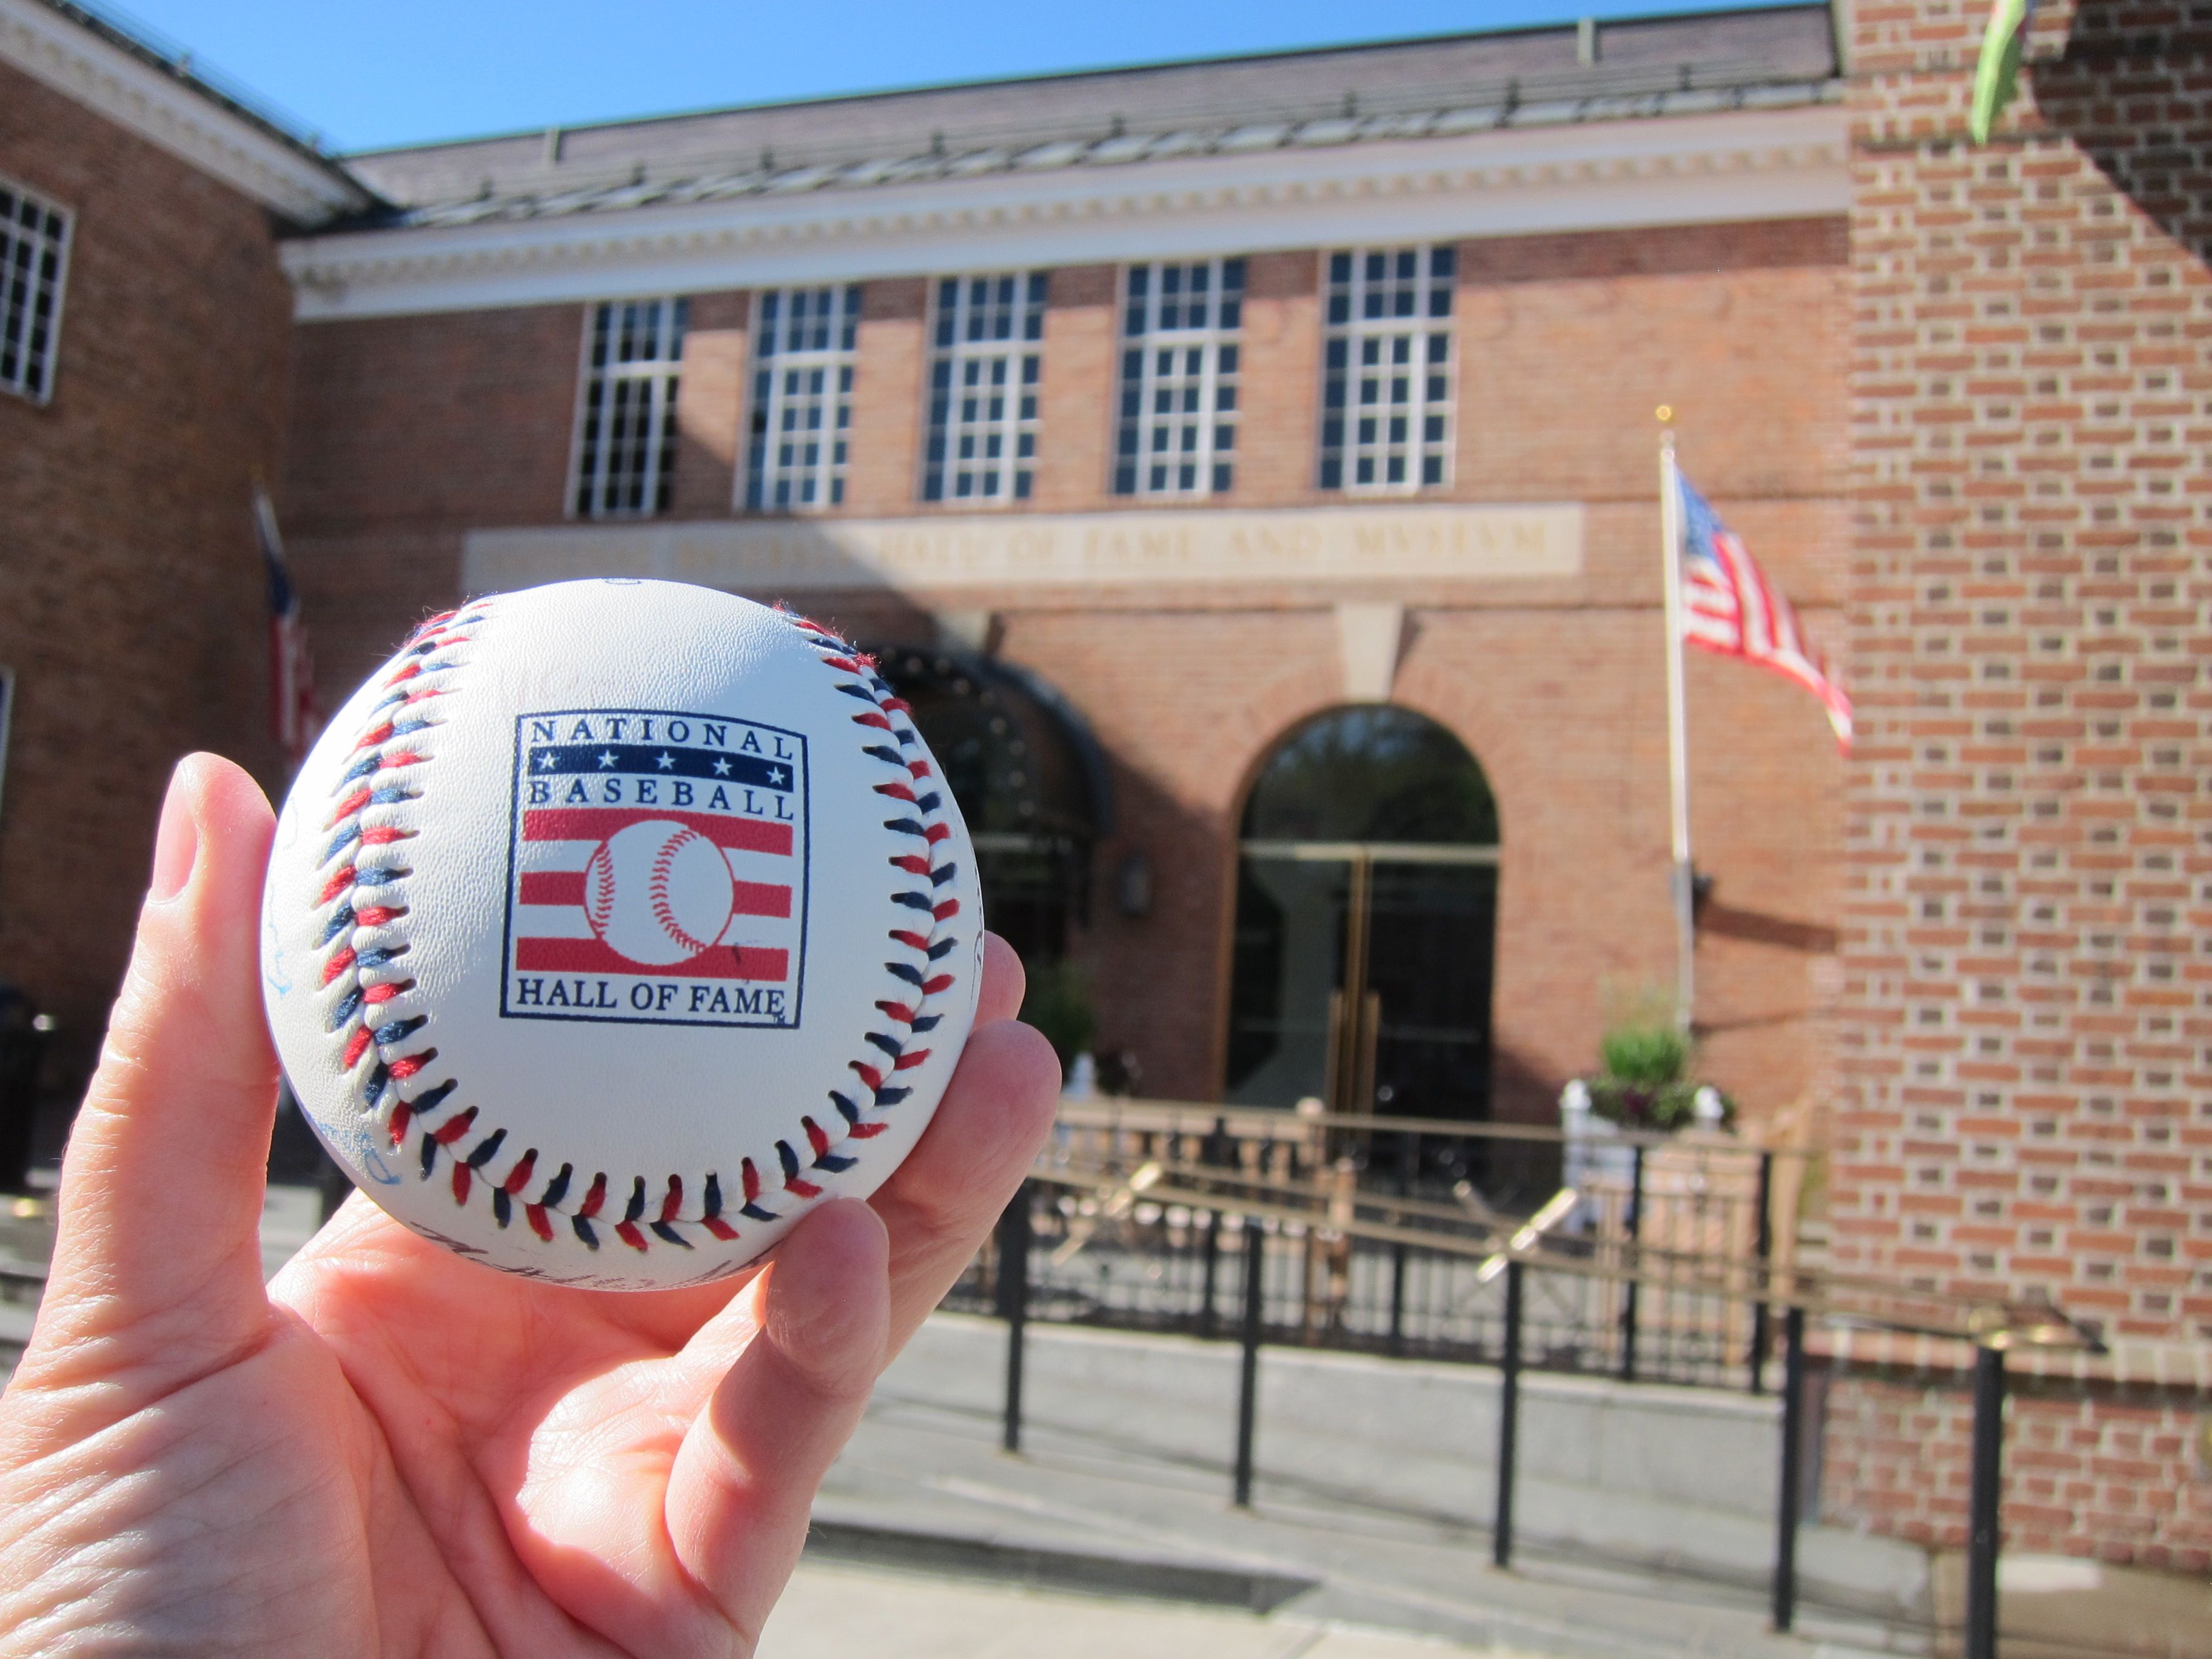 The Best Sports Halls of Fame for Baseball, Football, and More